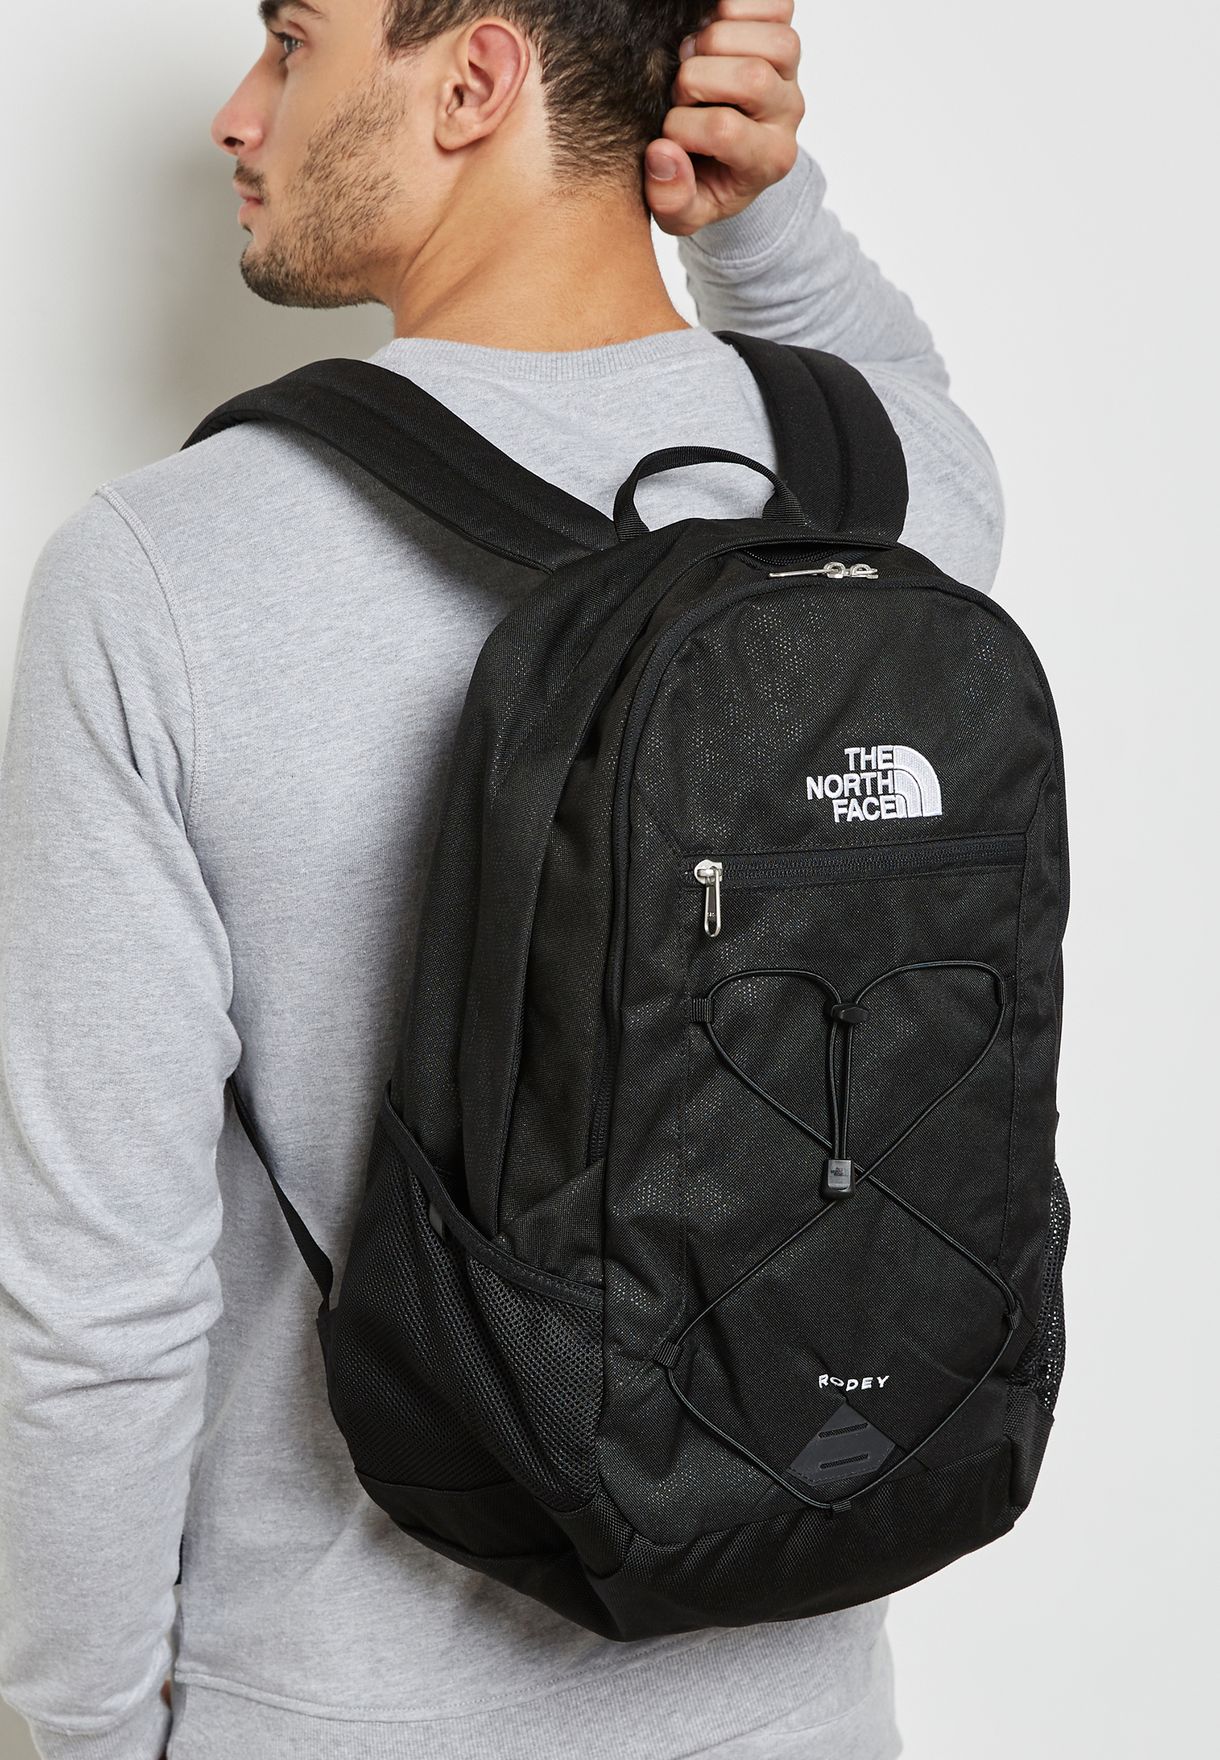 north face rodey backpack